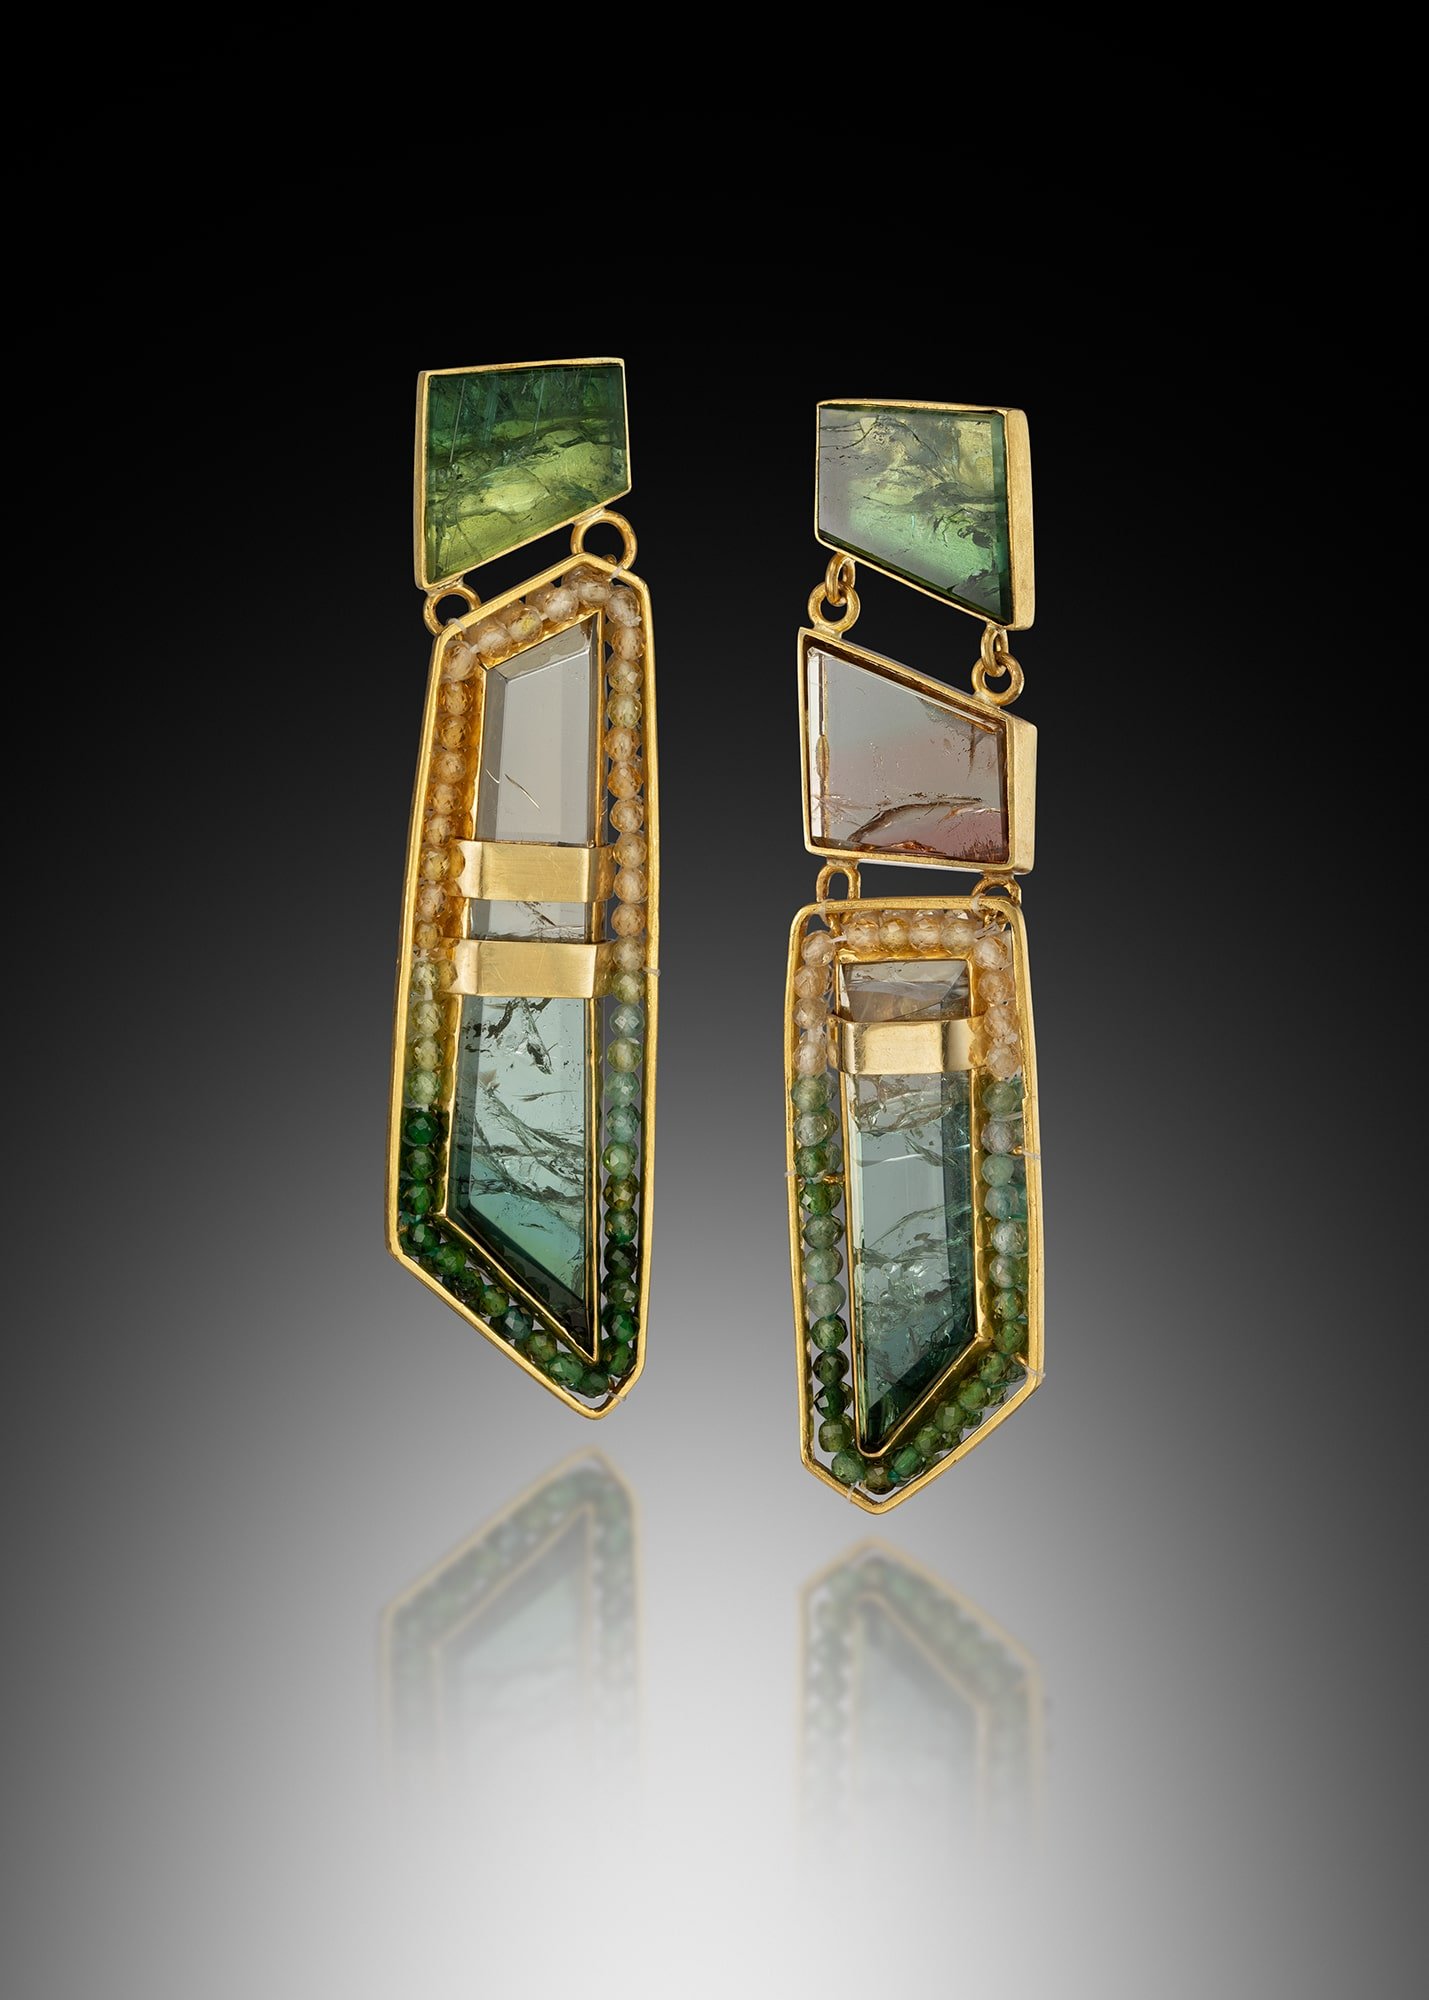 Landscape earrings. These earrings are hand woven and fabricated with tourmaline, and 20k gold beads, with tourmaline slices, set in 22k gold bezels.